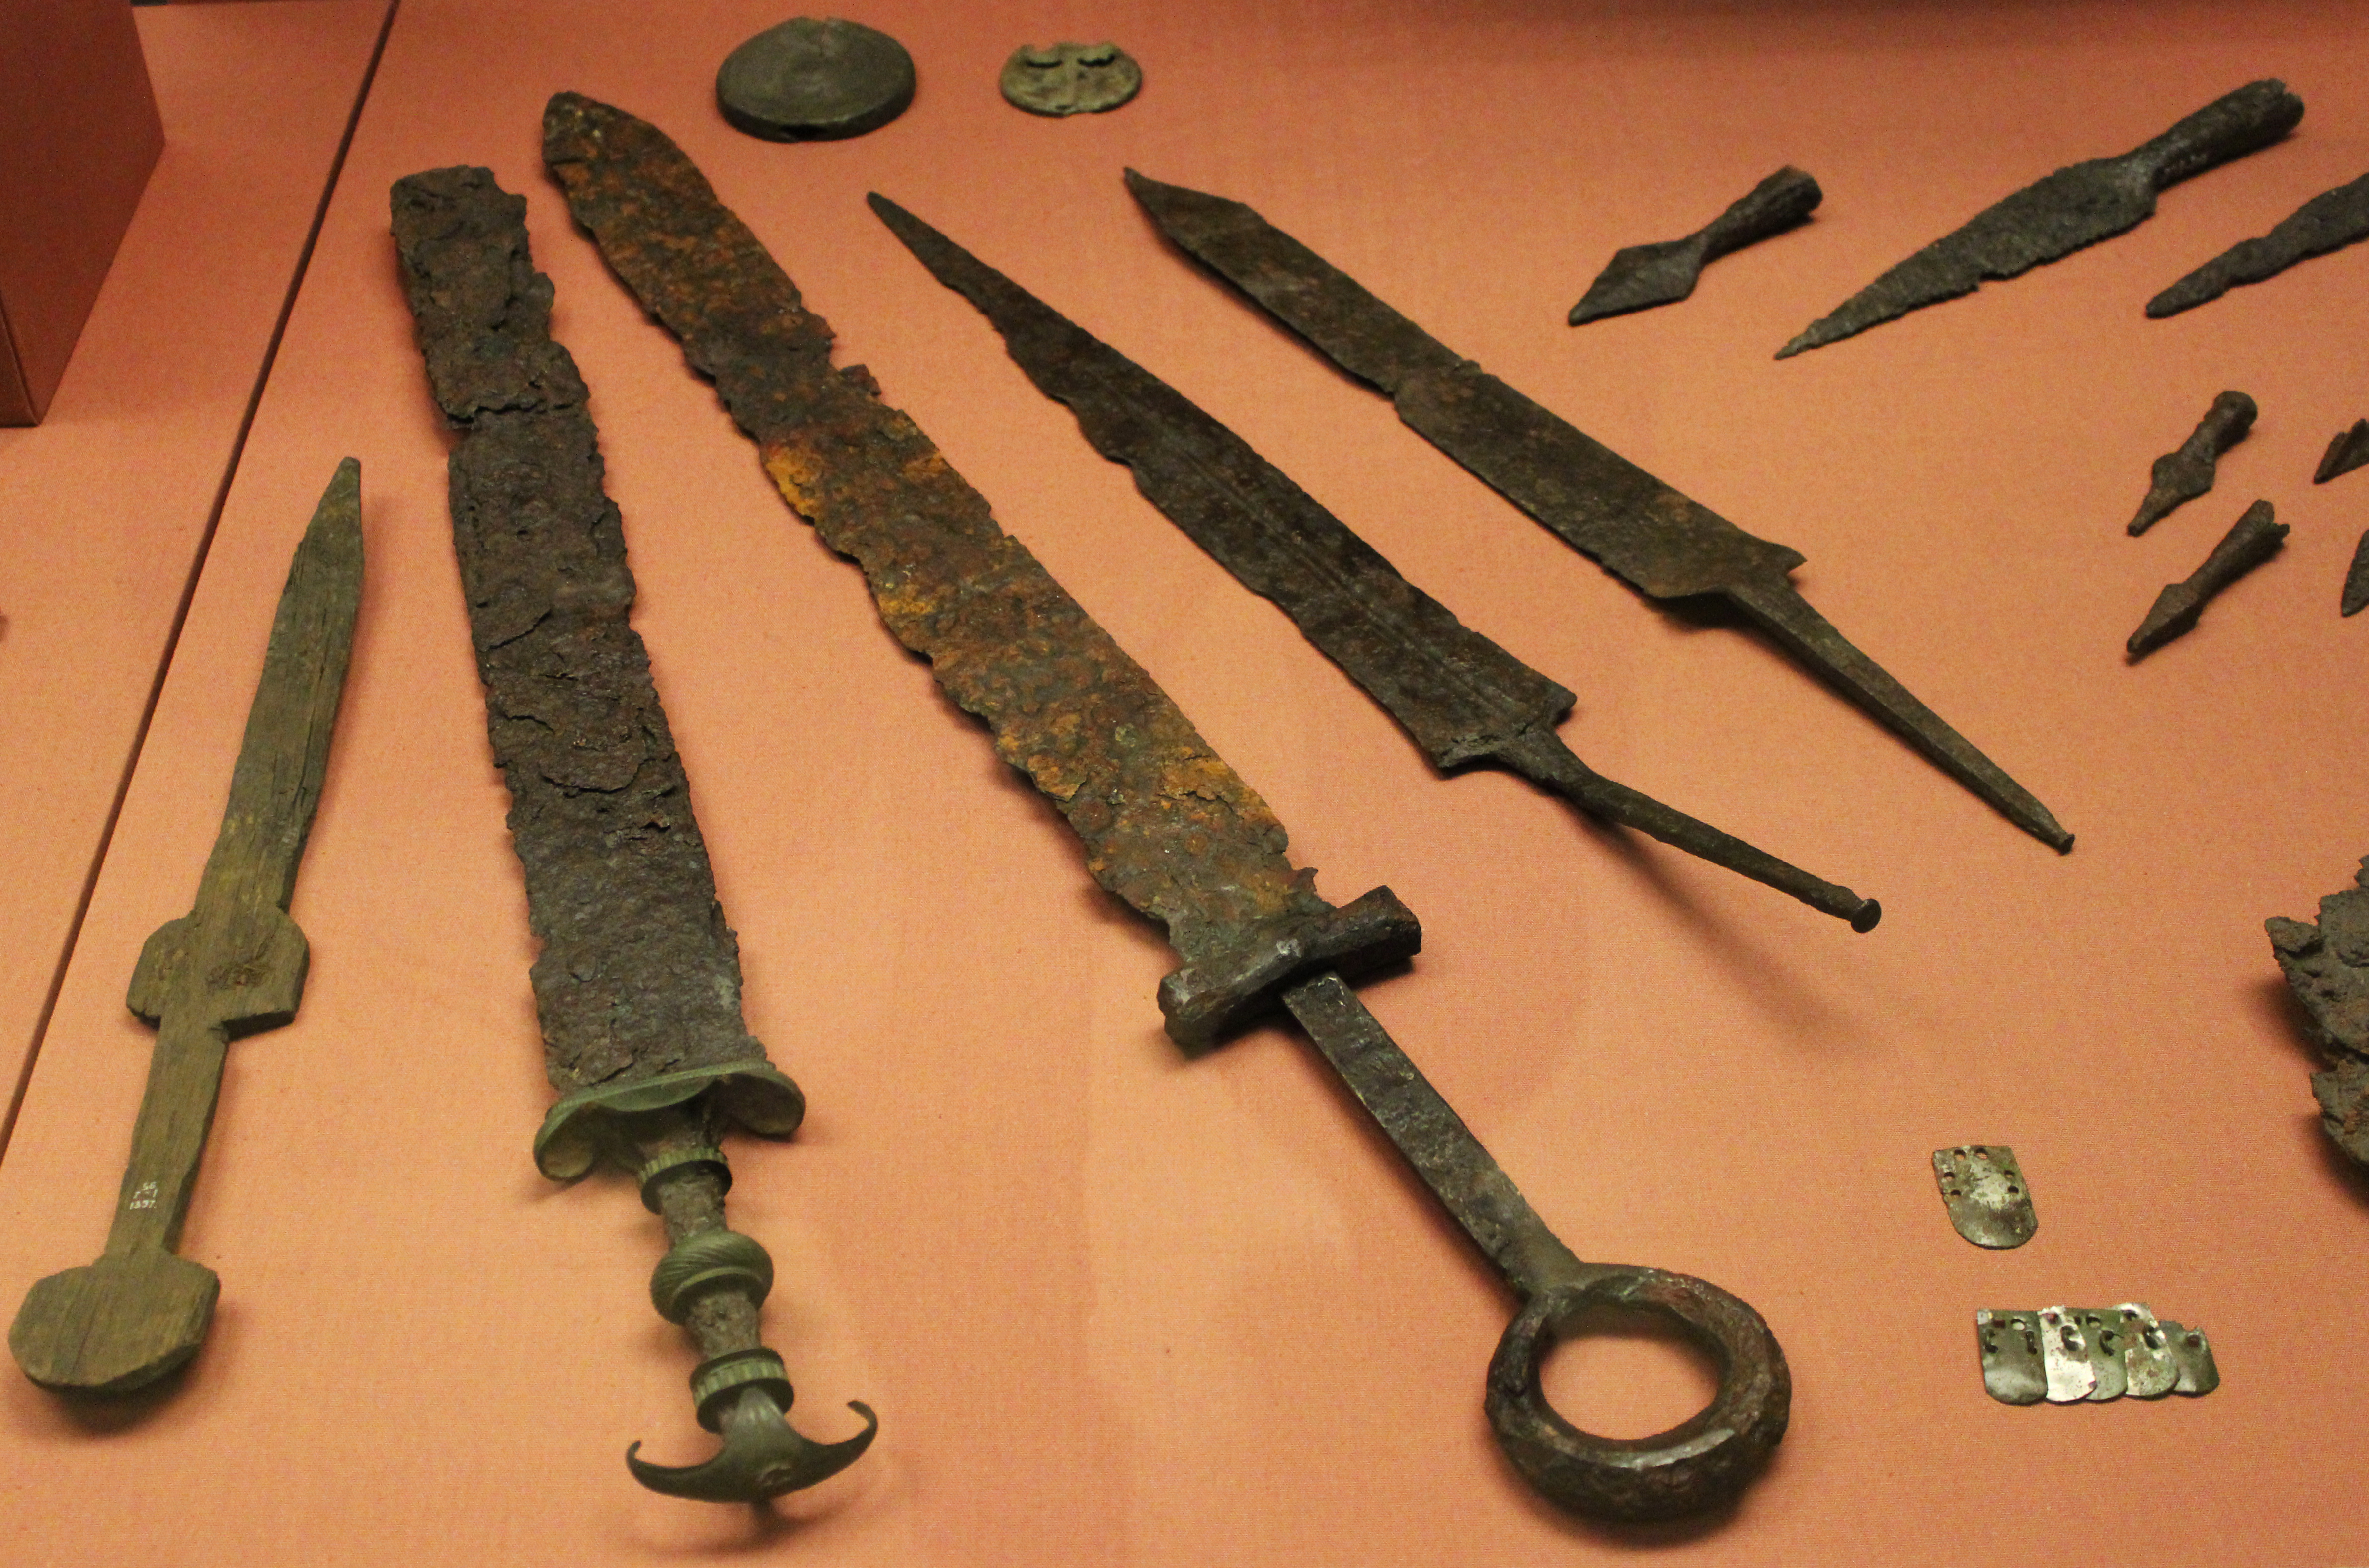 Ancient Weapons, British Museum by ak1508 on DeviantArt